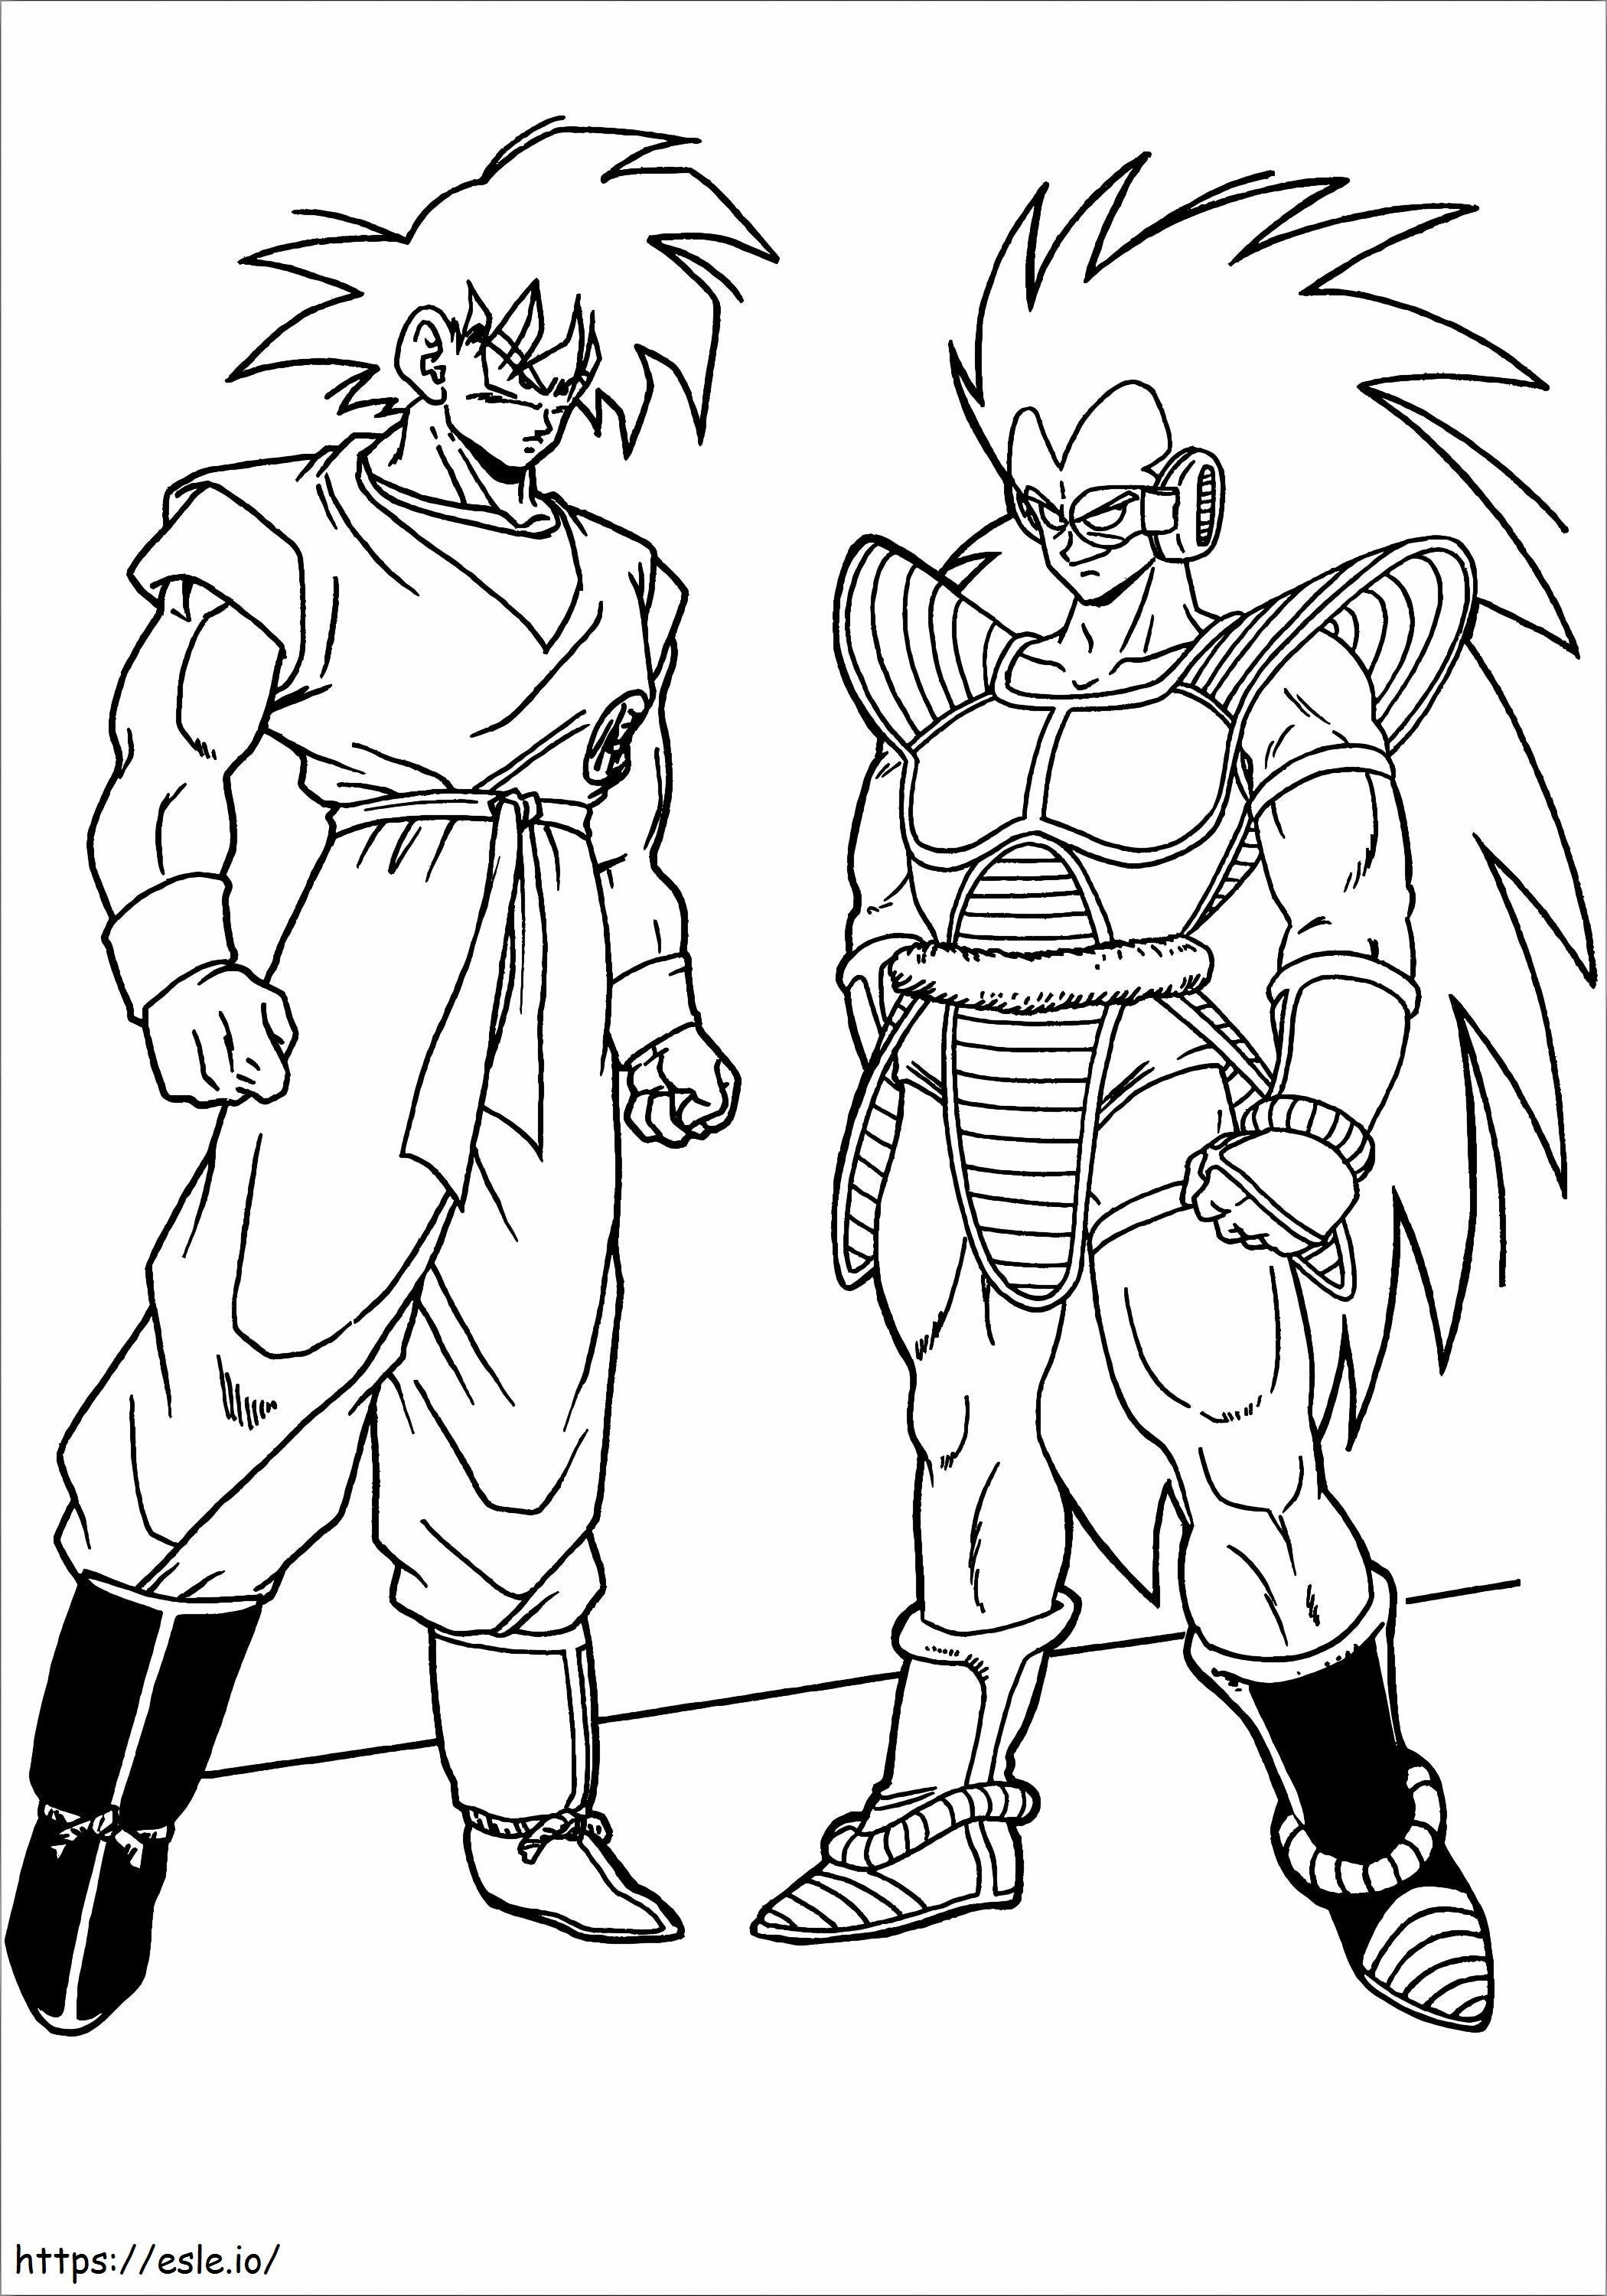 Cute Goku And Vegeta coloring page